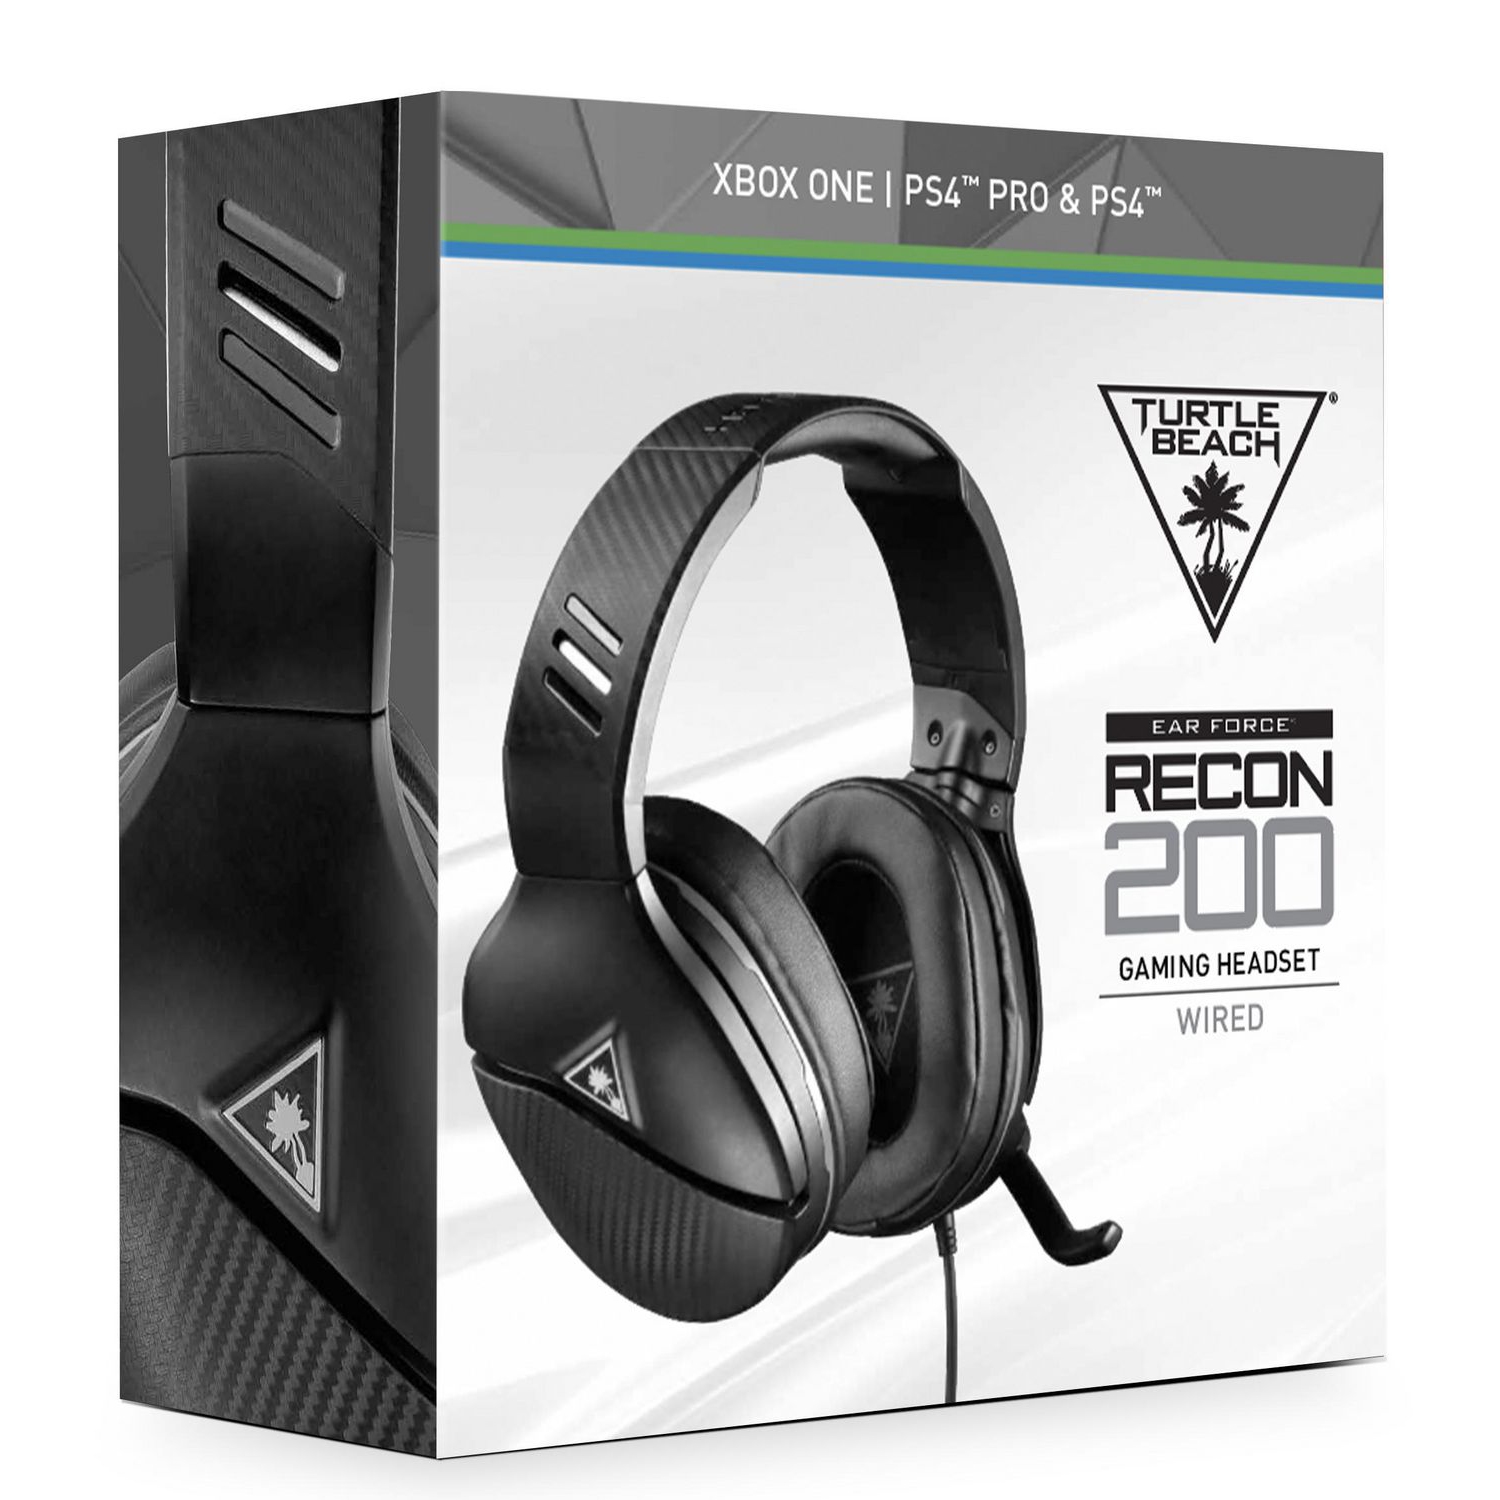 Turtle Beach Recon 200 Amplified Gaming Headset for Xbox One/PlayStation 4 Pro/Nintendo - Black - Refurbished